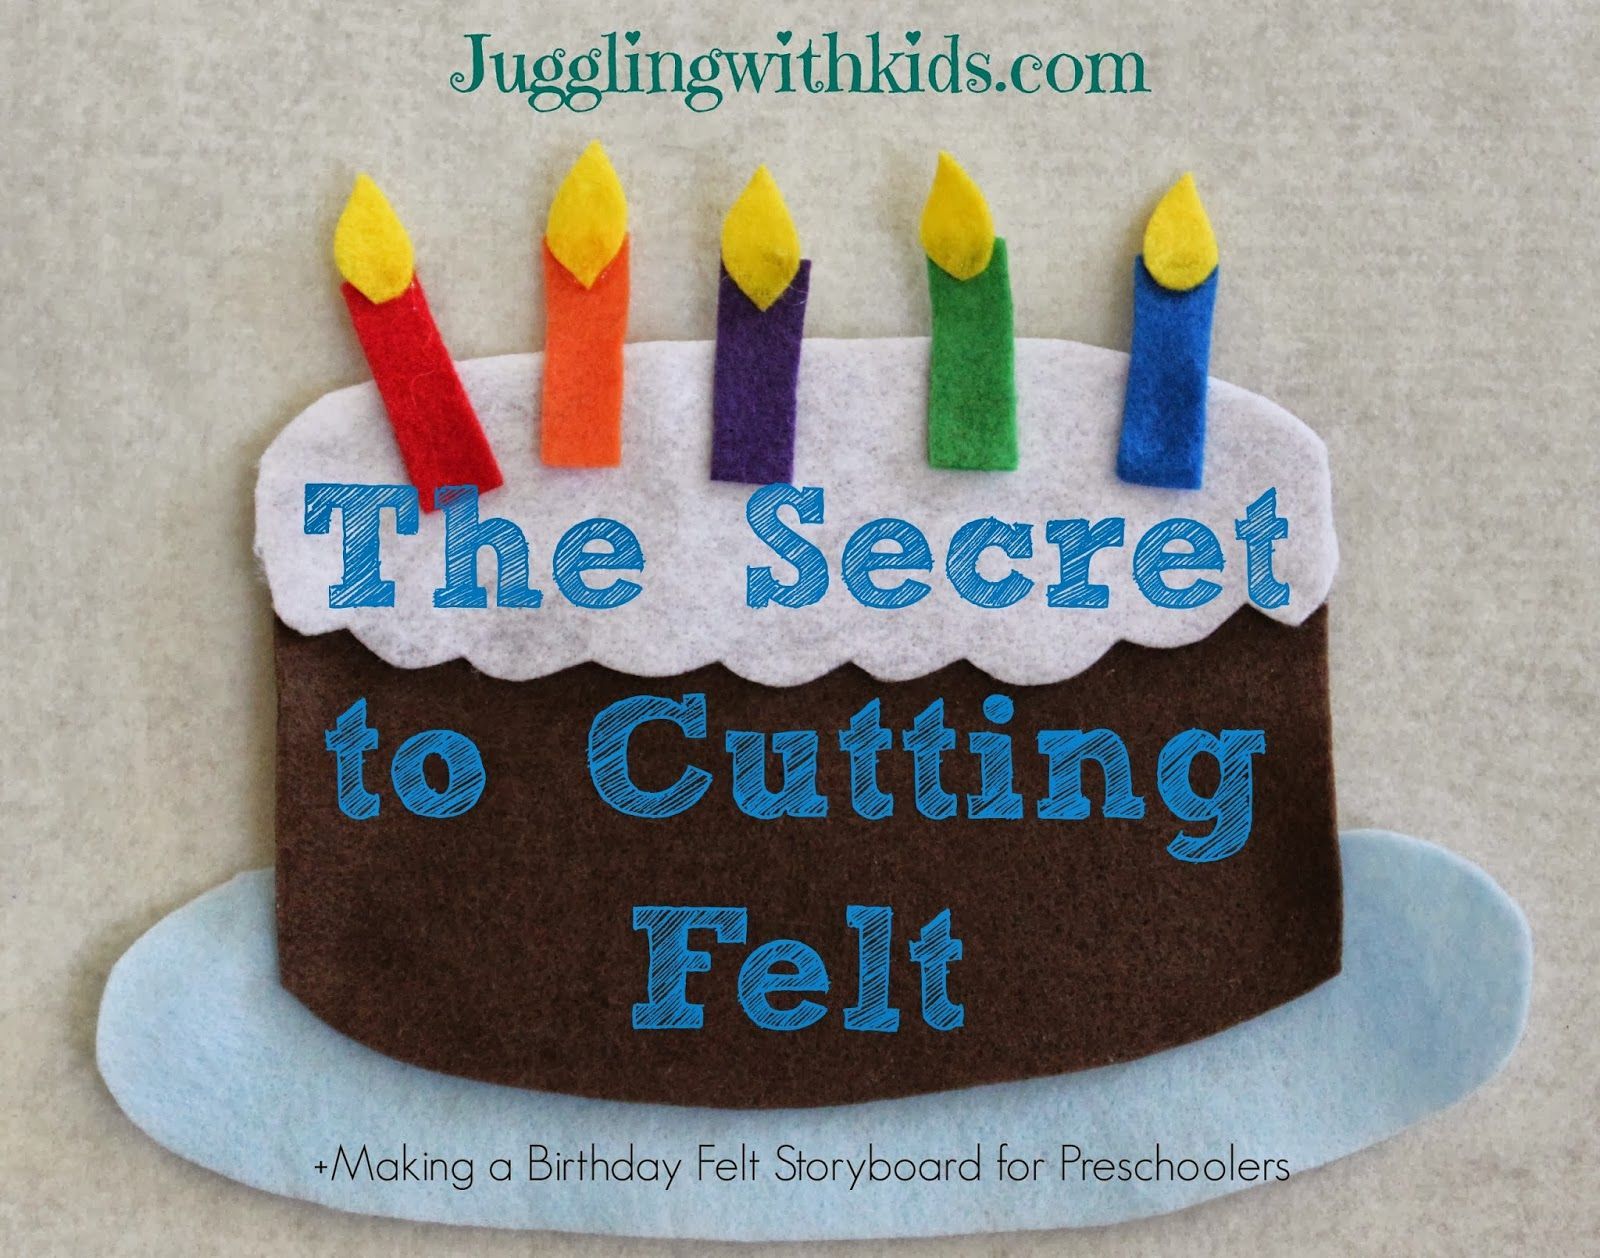 Juggling With Kids: The Secret to Cutting Felt & Making Felt Storyboards for Pre